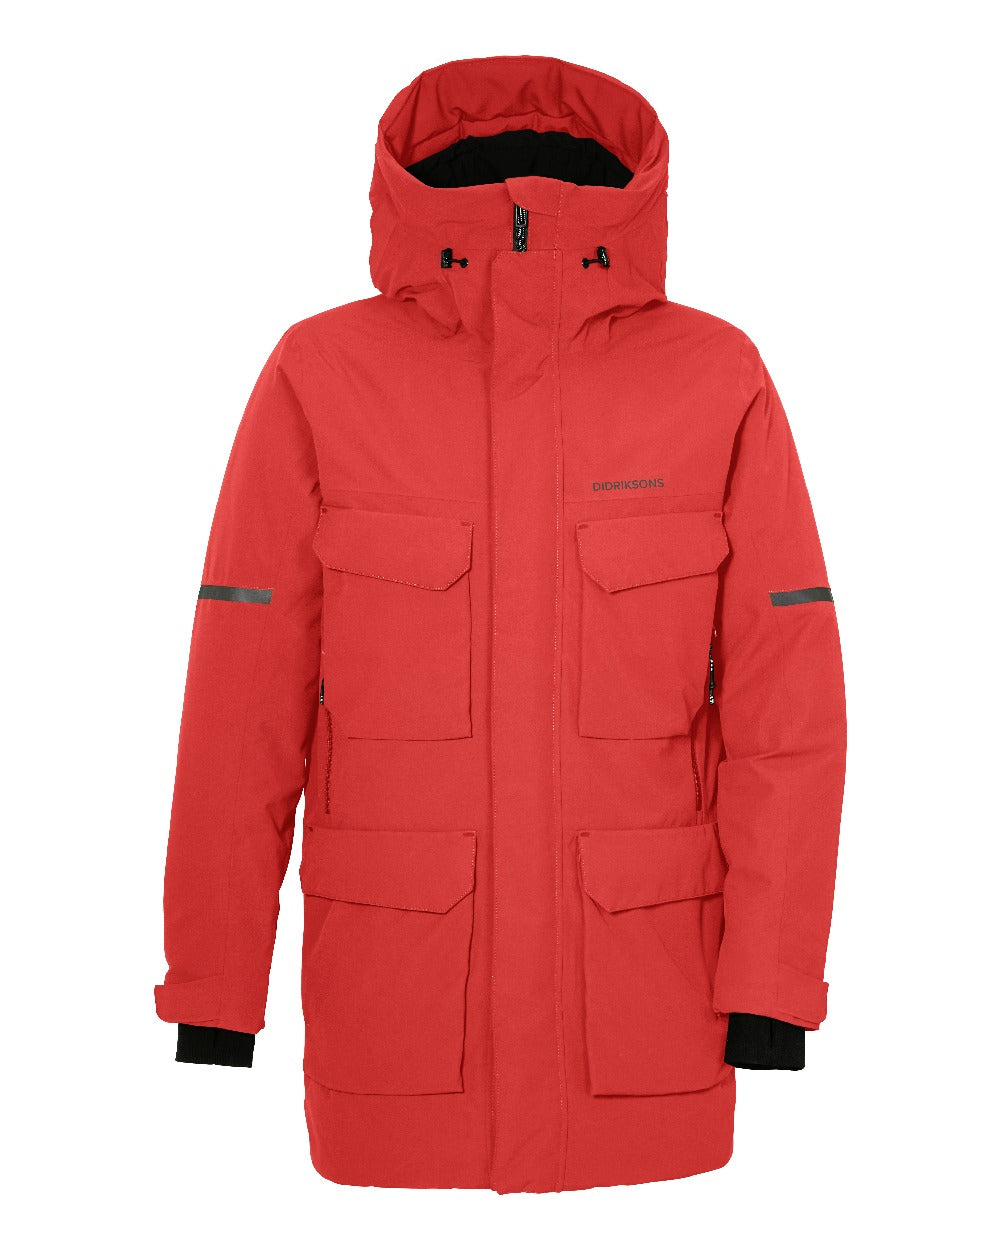 Didriksons Drew Parka 7 in Pomme Red 